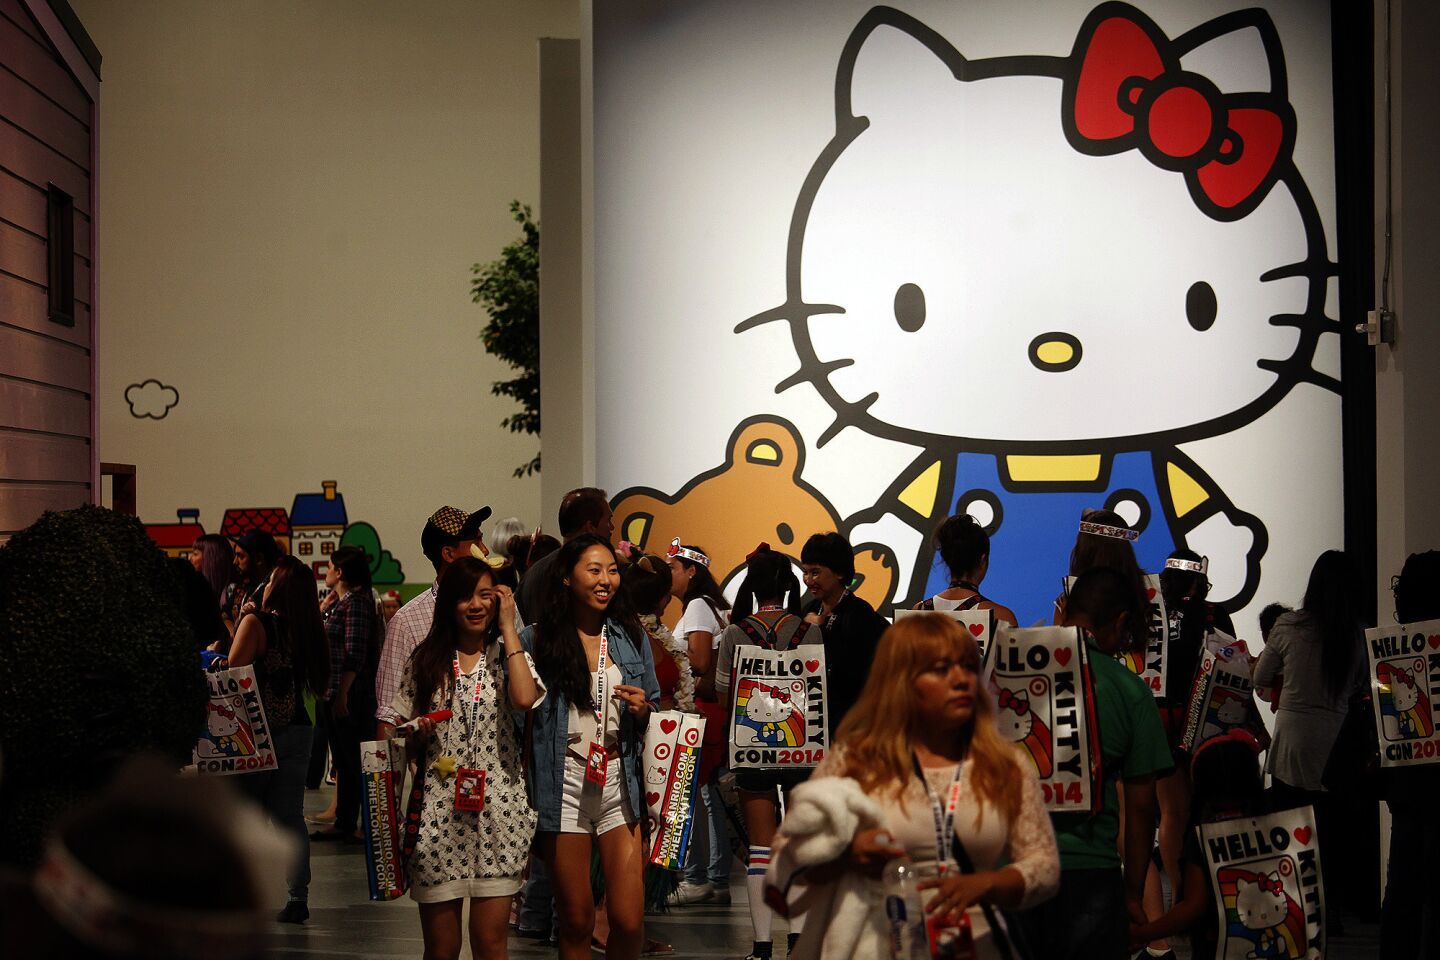 Arts and culture in pictures by The Times | Hello Kitty Con 2014